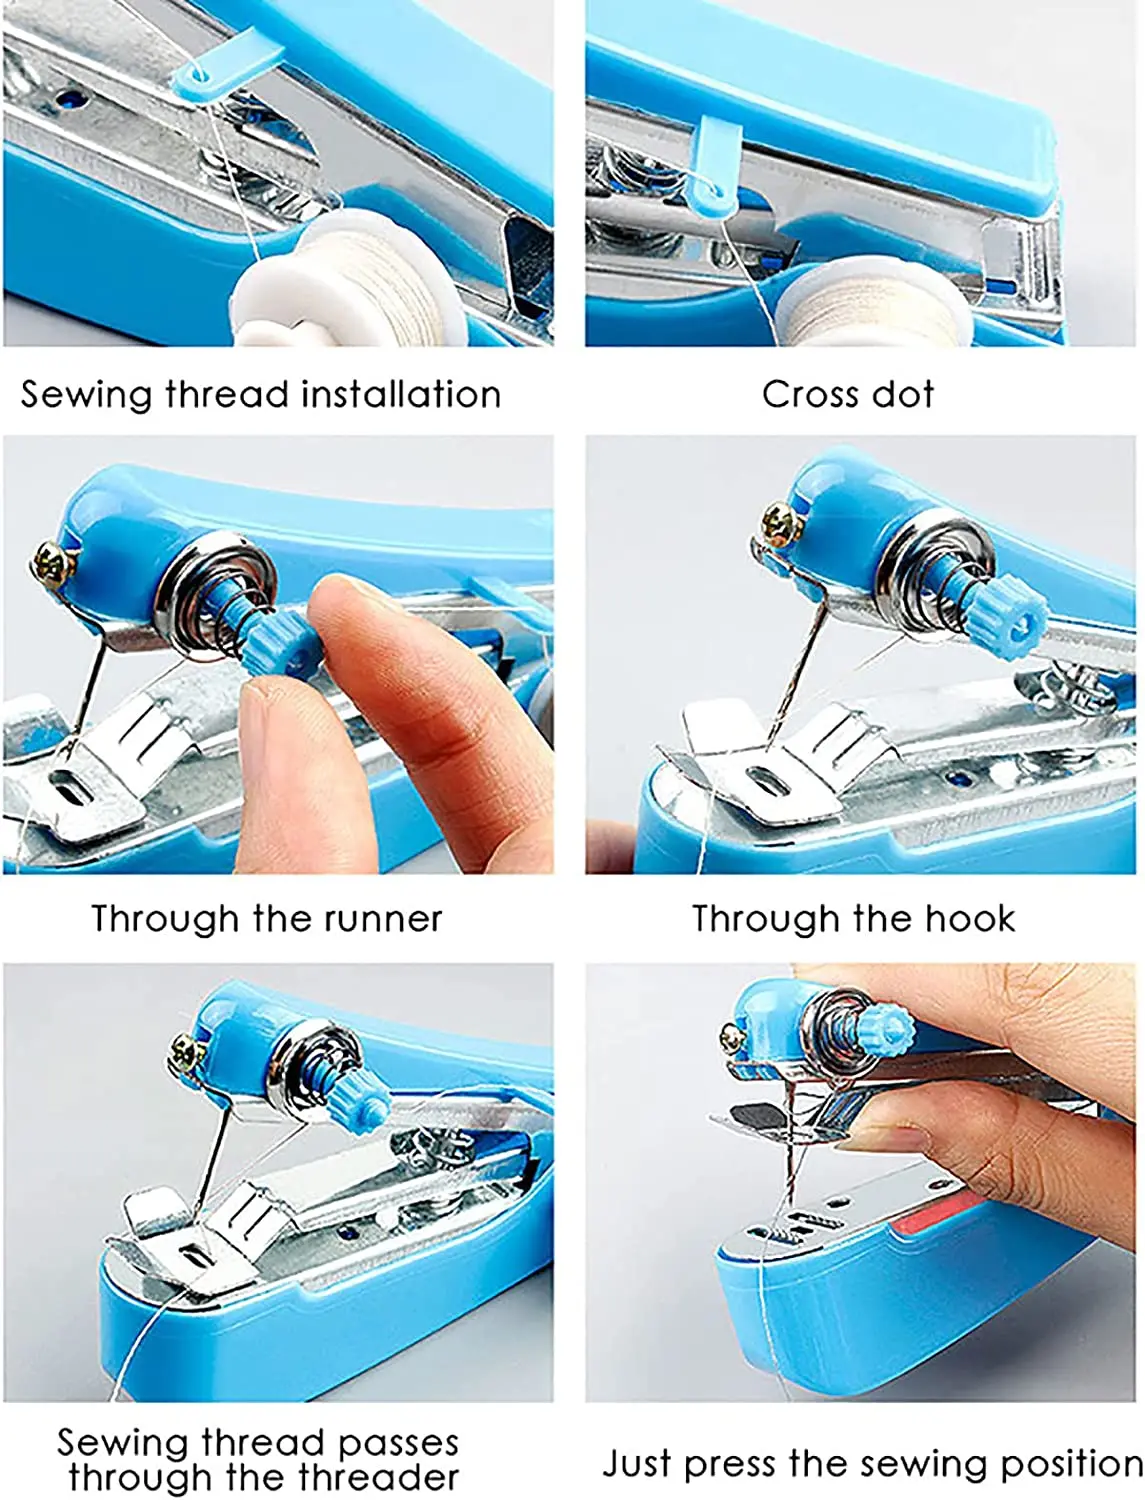 Mini Sewing Machine Portable Electric Home Crafting DIY Project Working